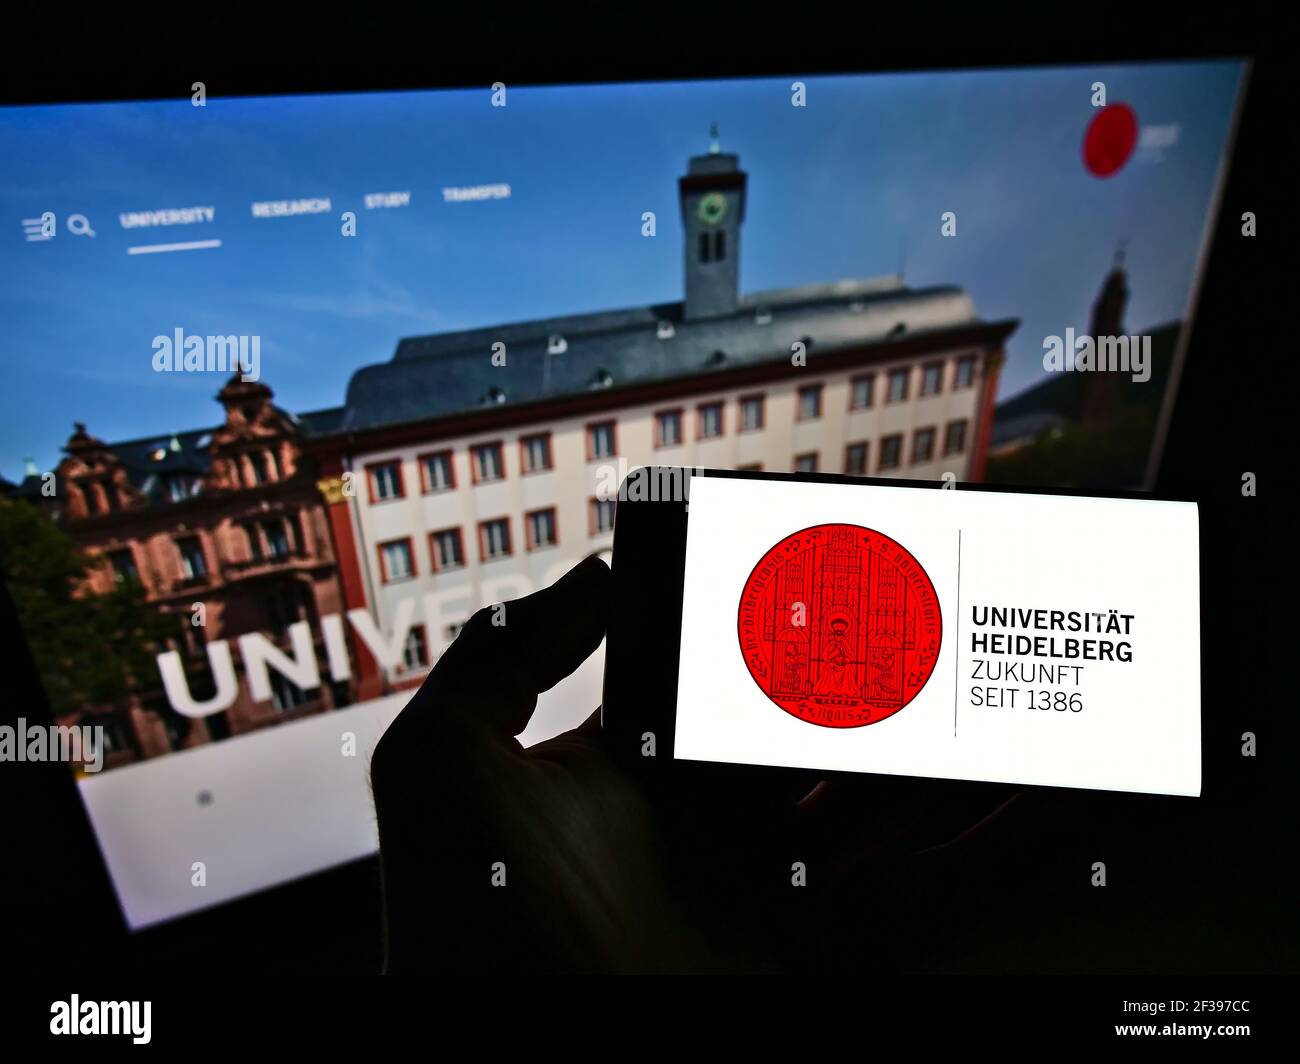 Person holding cellphone with logo of German university Ruprecht-Karls-Universität Heidelberg on screen in front of web page. Focus on phone display. Stock Photo